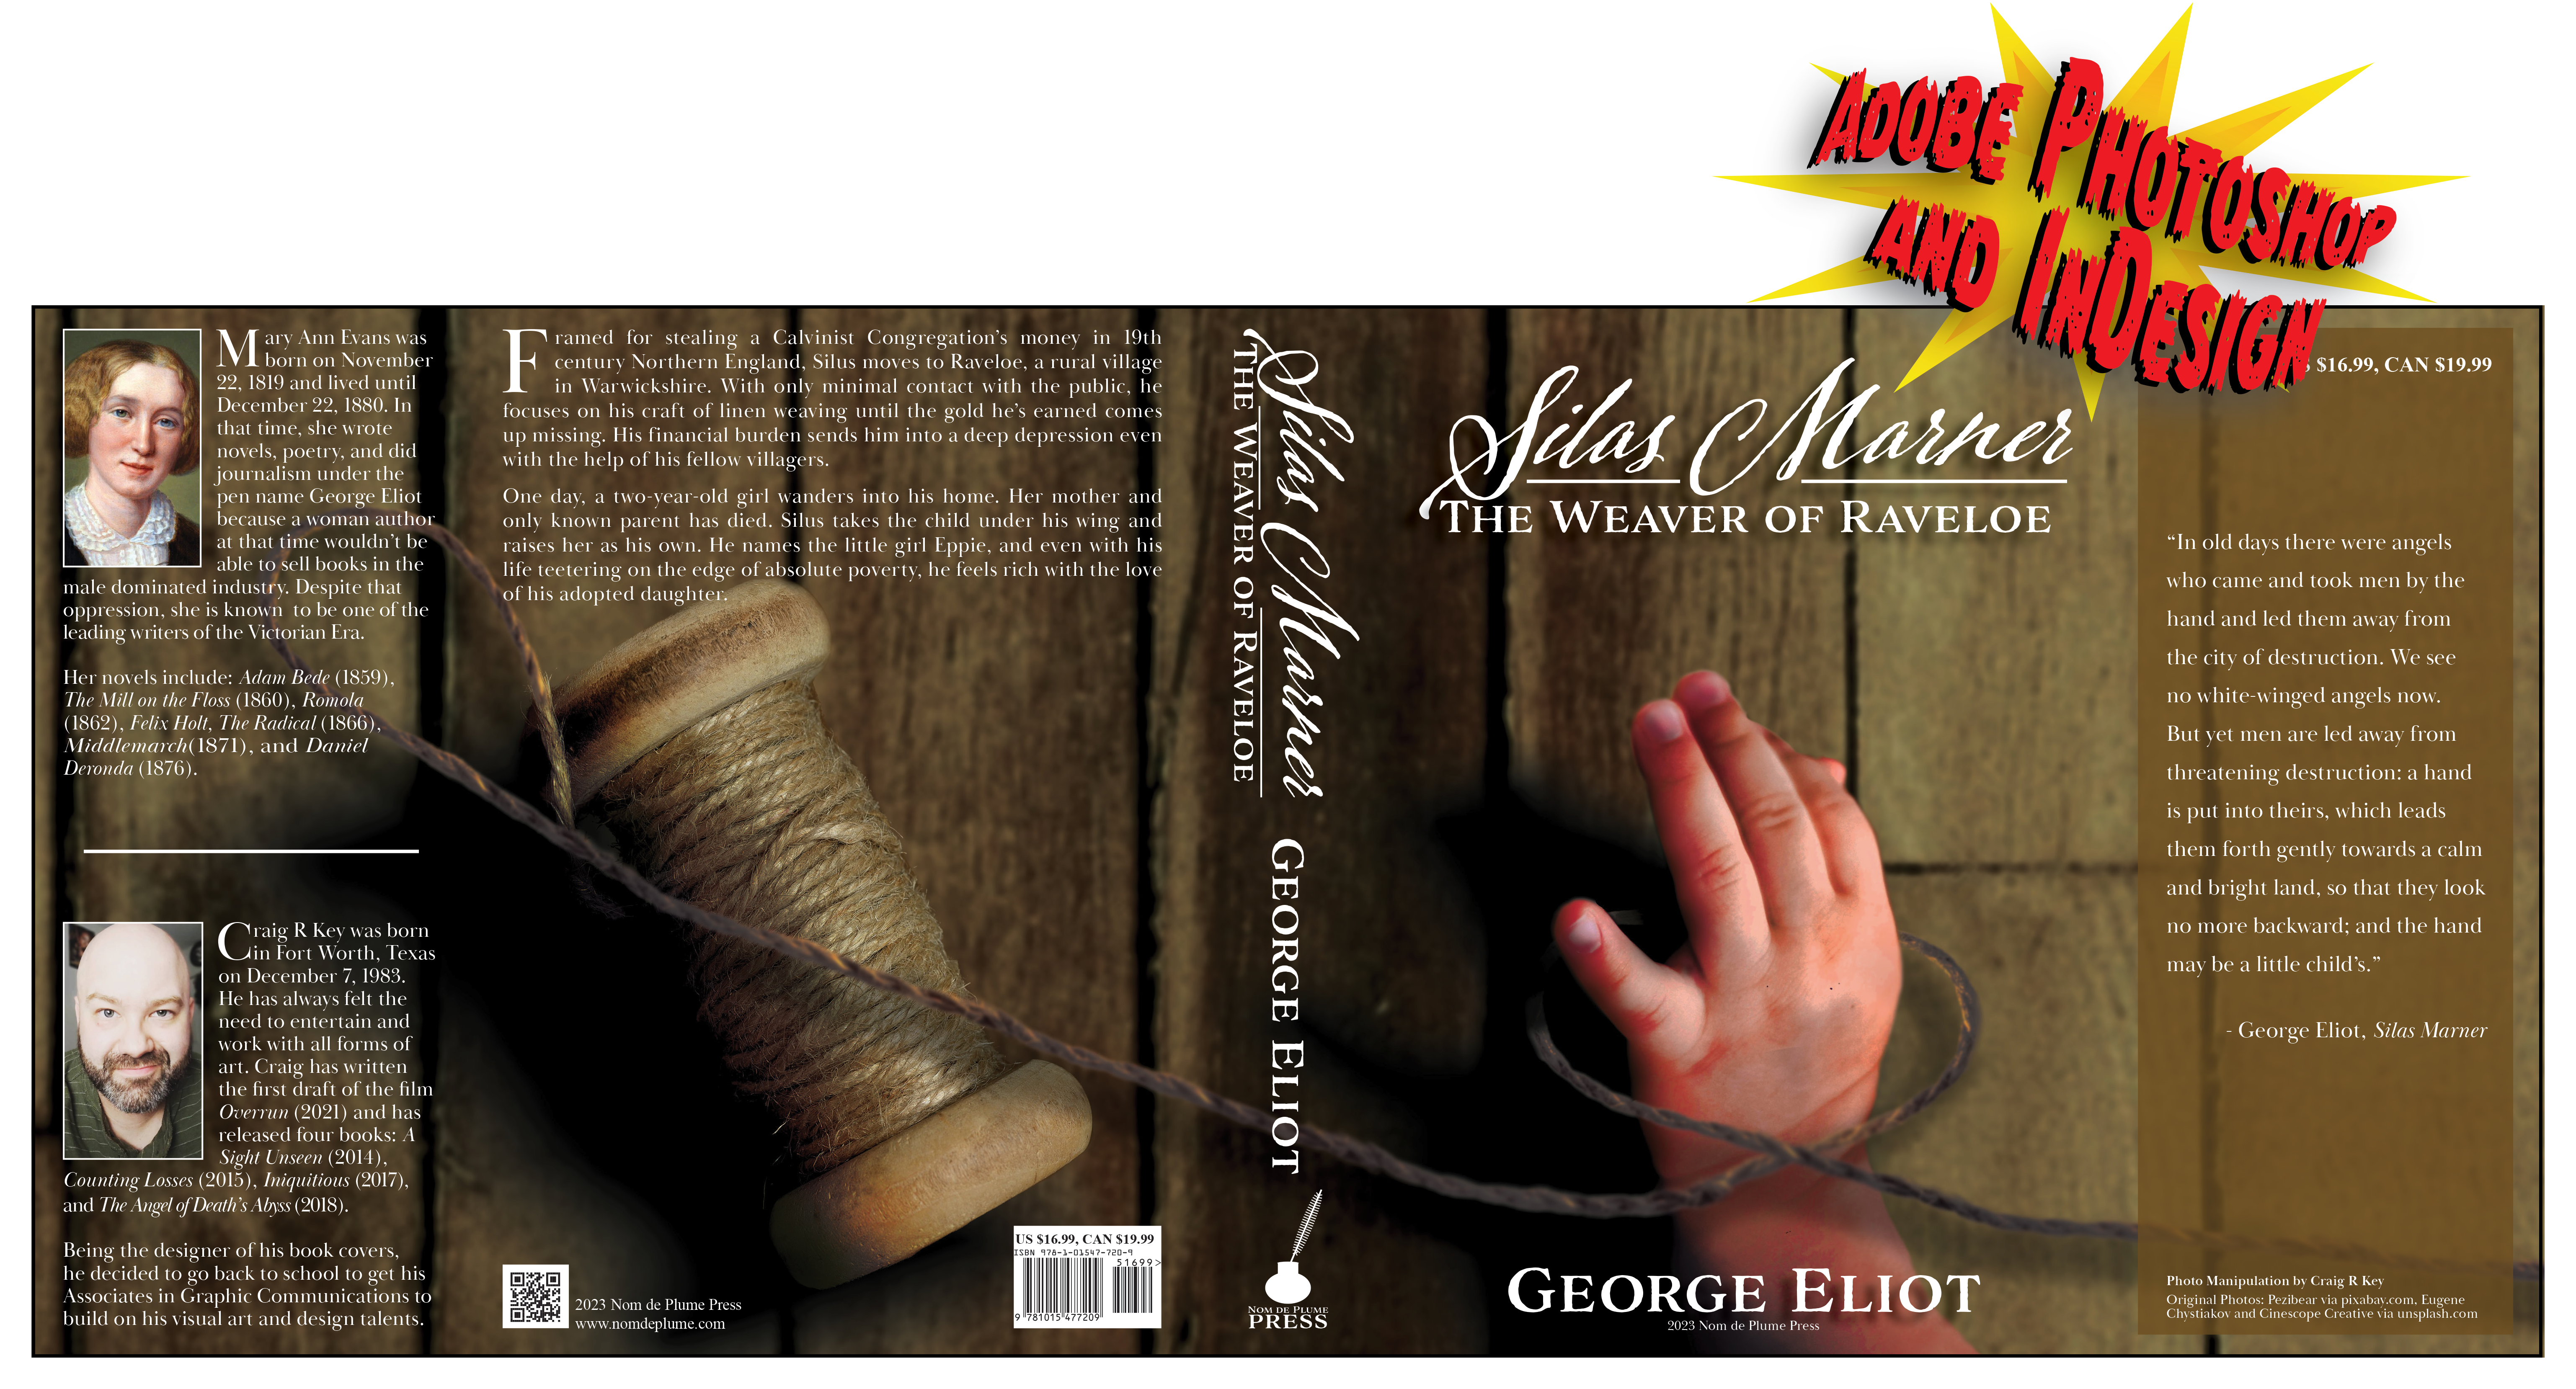 Dust jacket cover for Silus Marner: The Weaver of Ravloe by Mary Ann Evans AKA George Eliot. Created with Adobe Photoshop and InDesign.